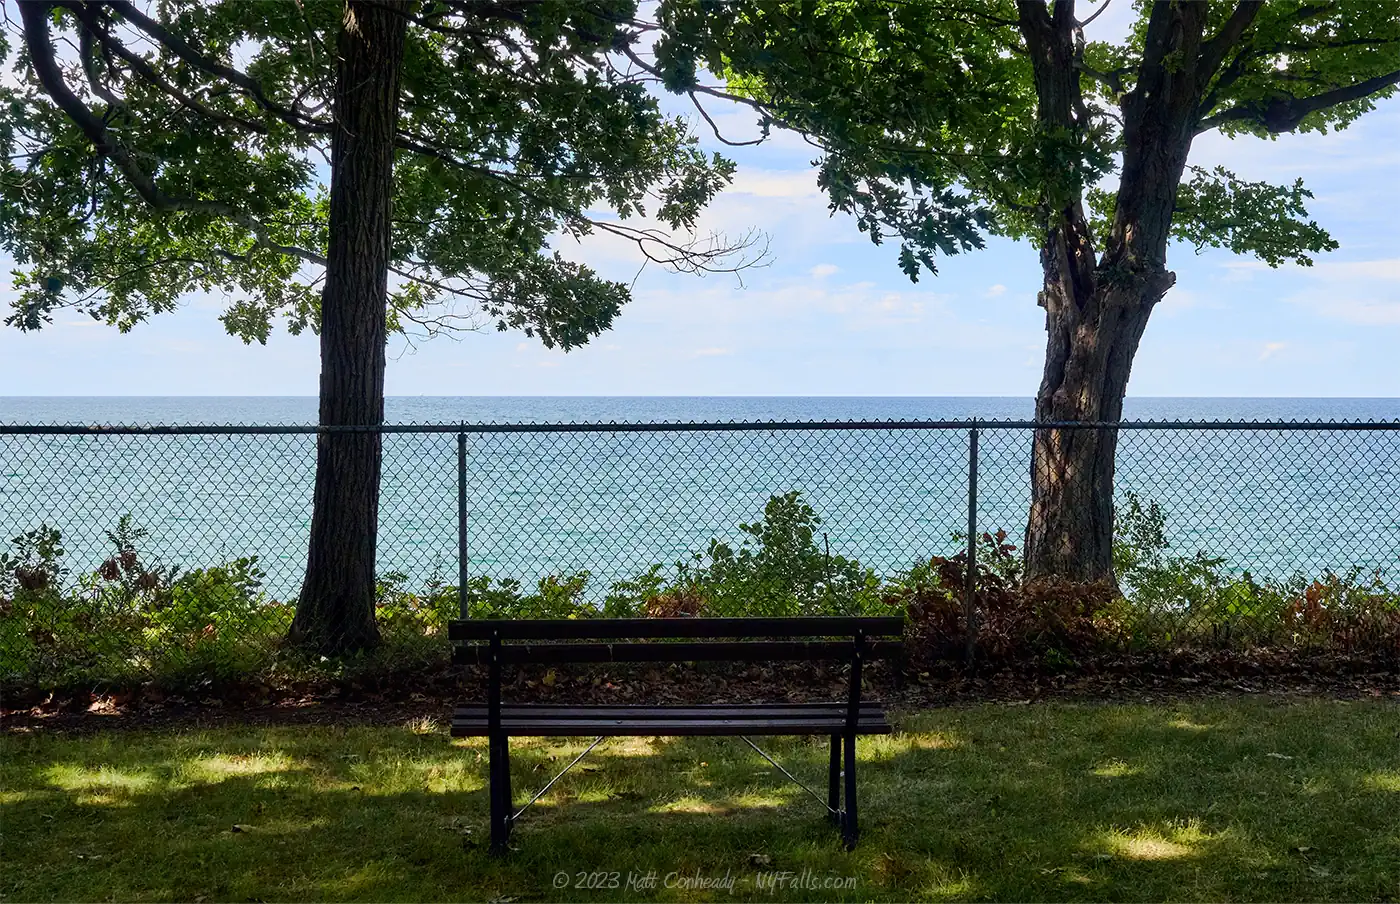 A view of Lake Erie from Ottaway Park showing a bench, fence, and trees